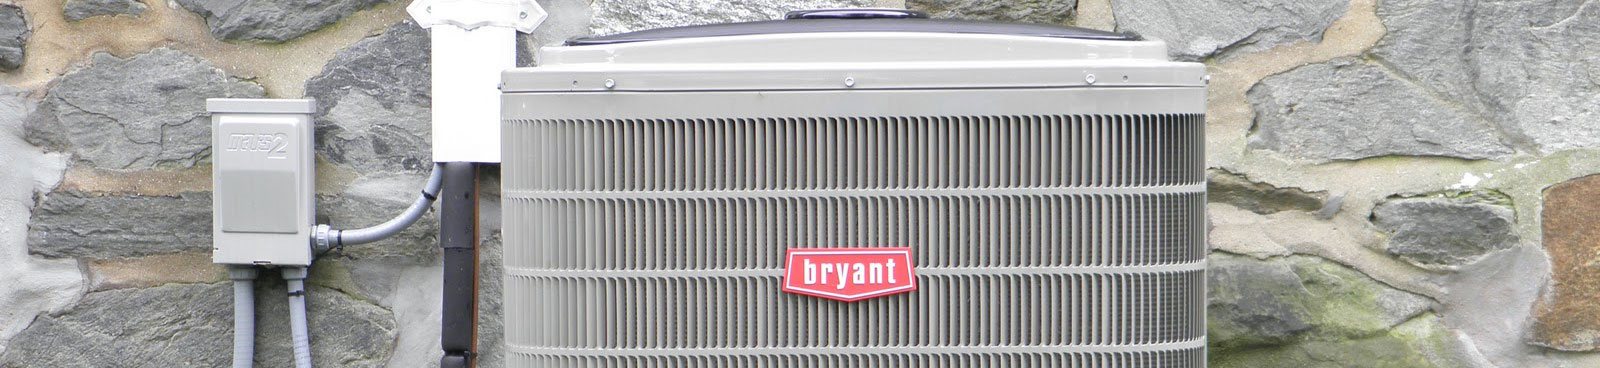 Bryant Condensor Outside a Home